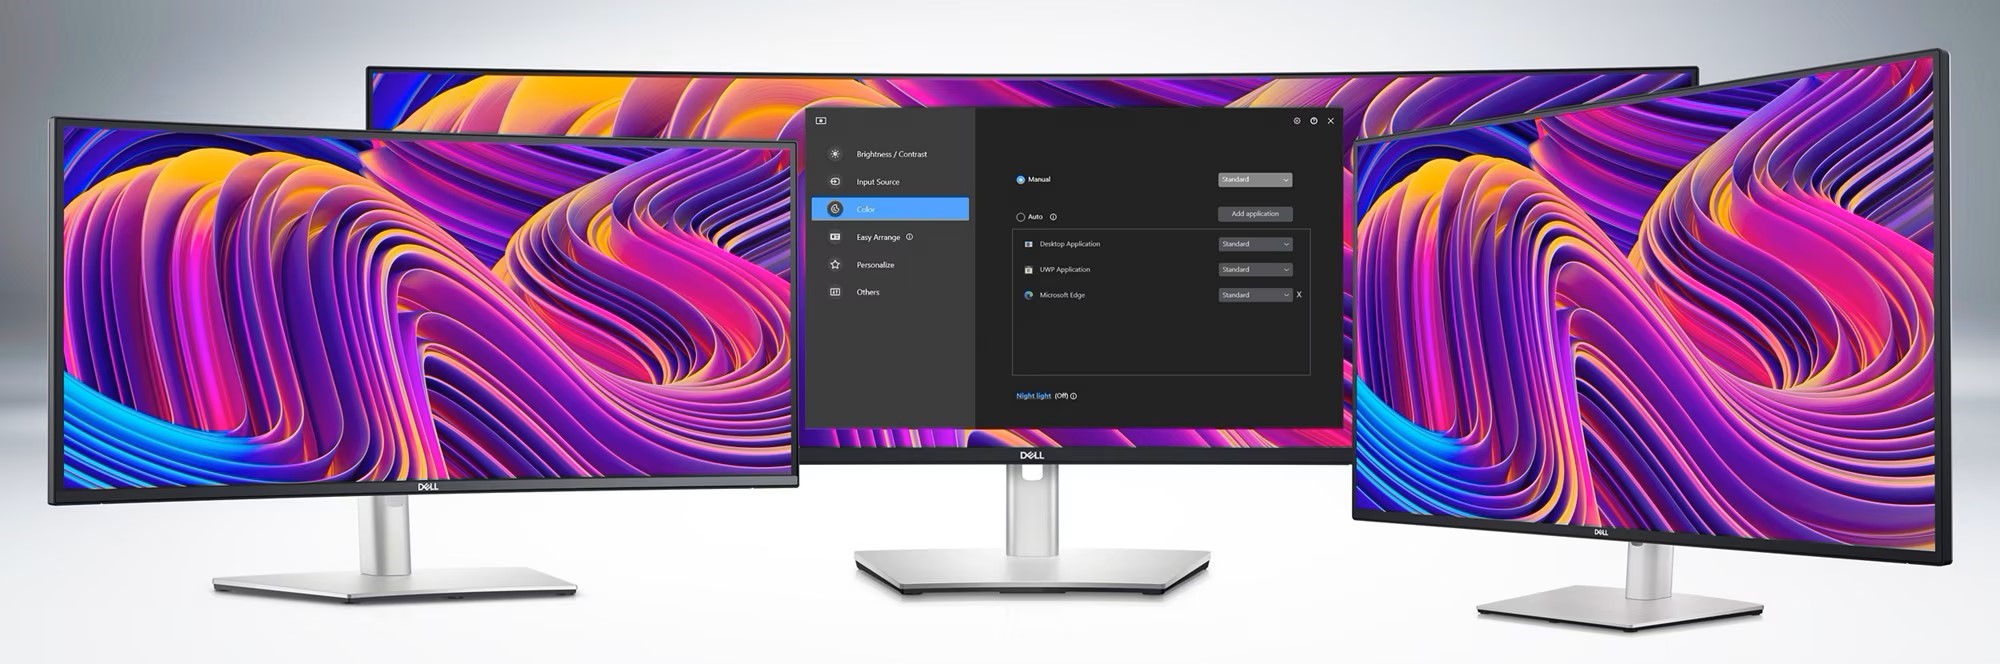 Dell S2421HS monitor - Specs, Pros / Cons: Insane Value For Money 